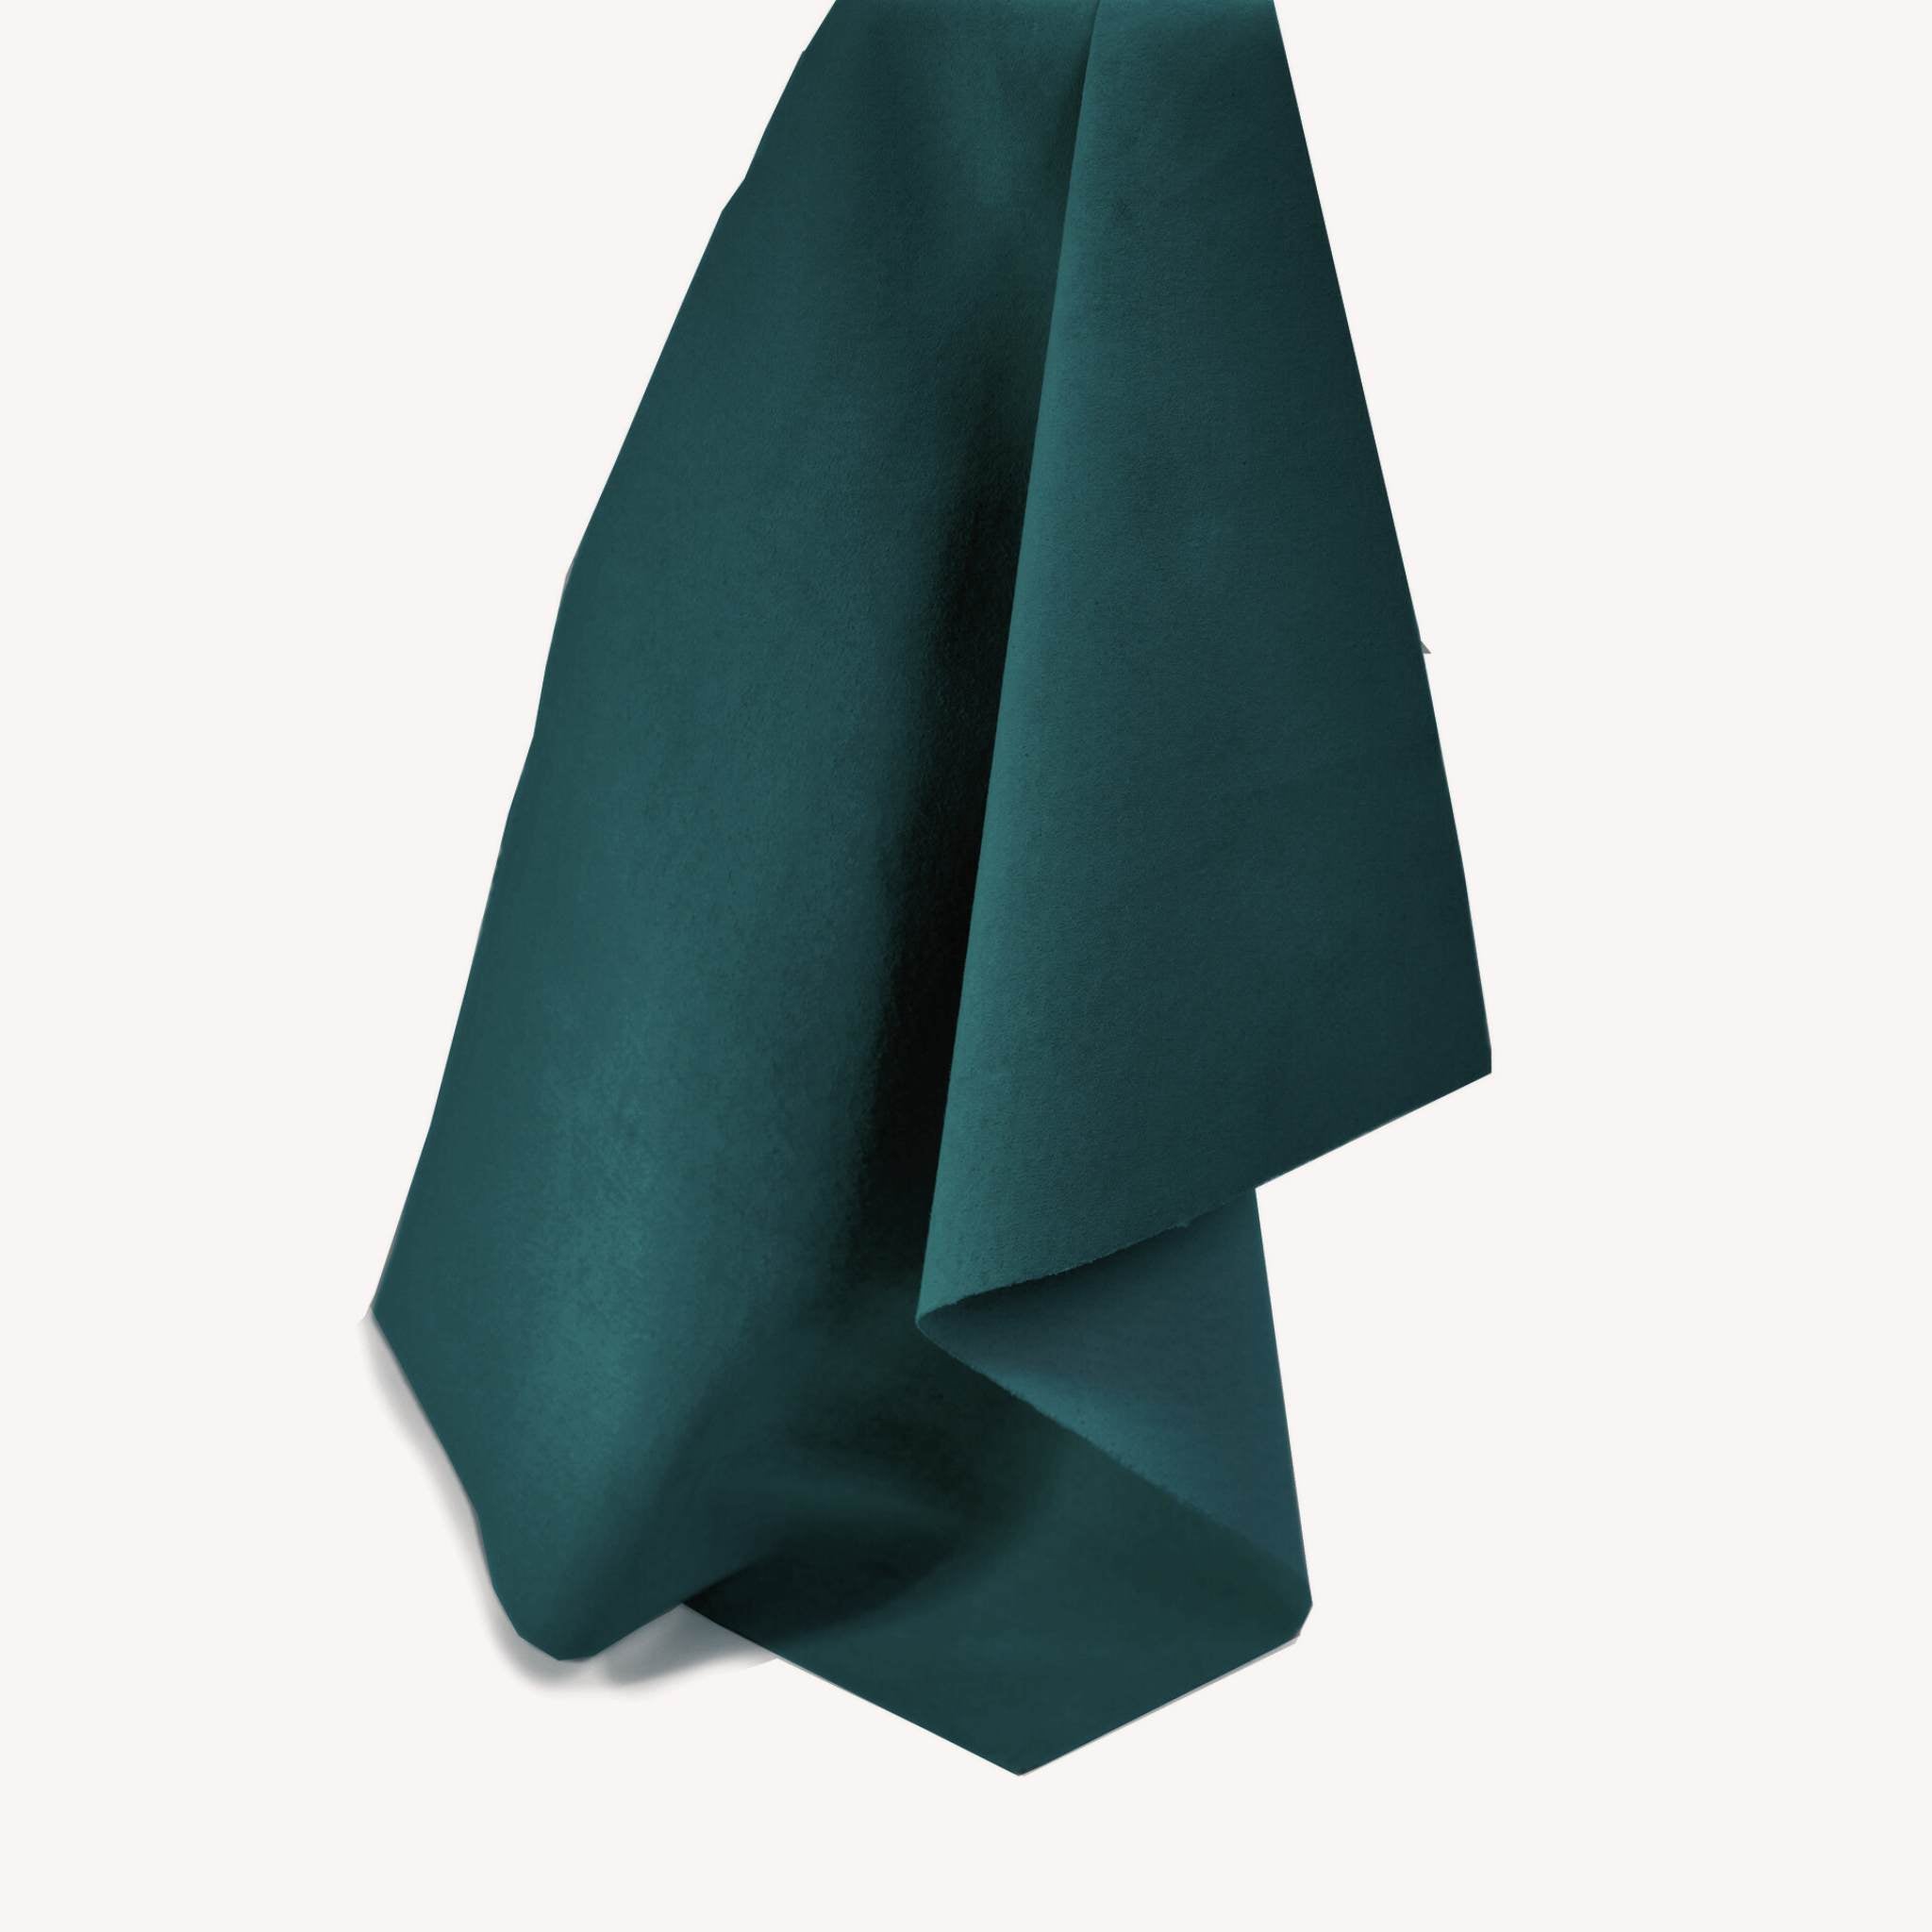 Soft and tactile lightweight suede leather in a muted shade of blue/green teal ideal for garment making, applique, linings